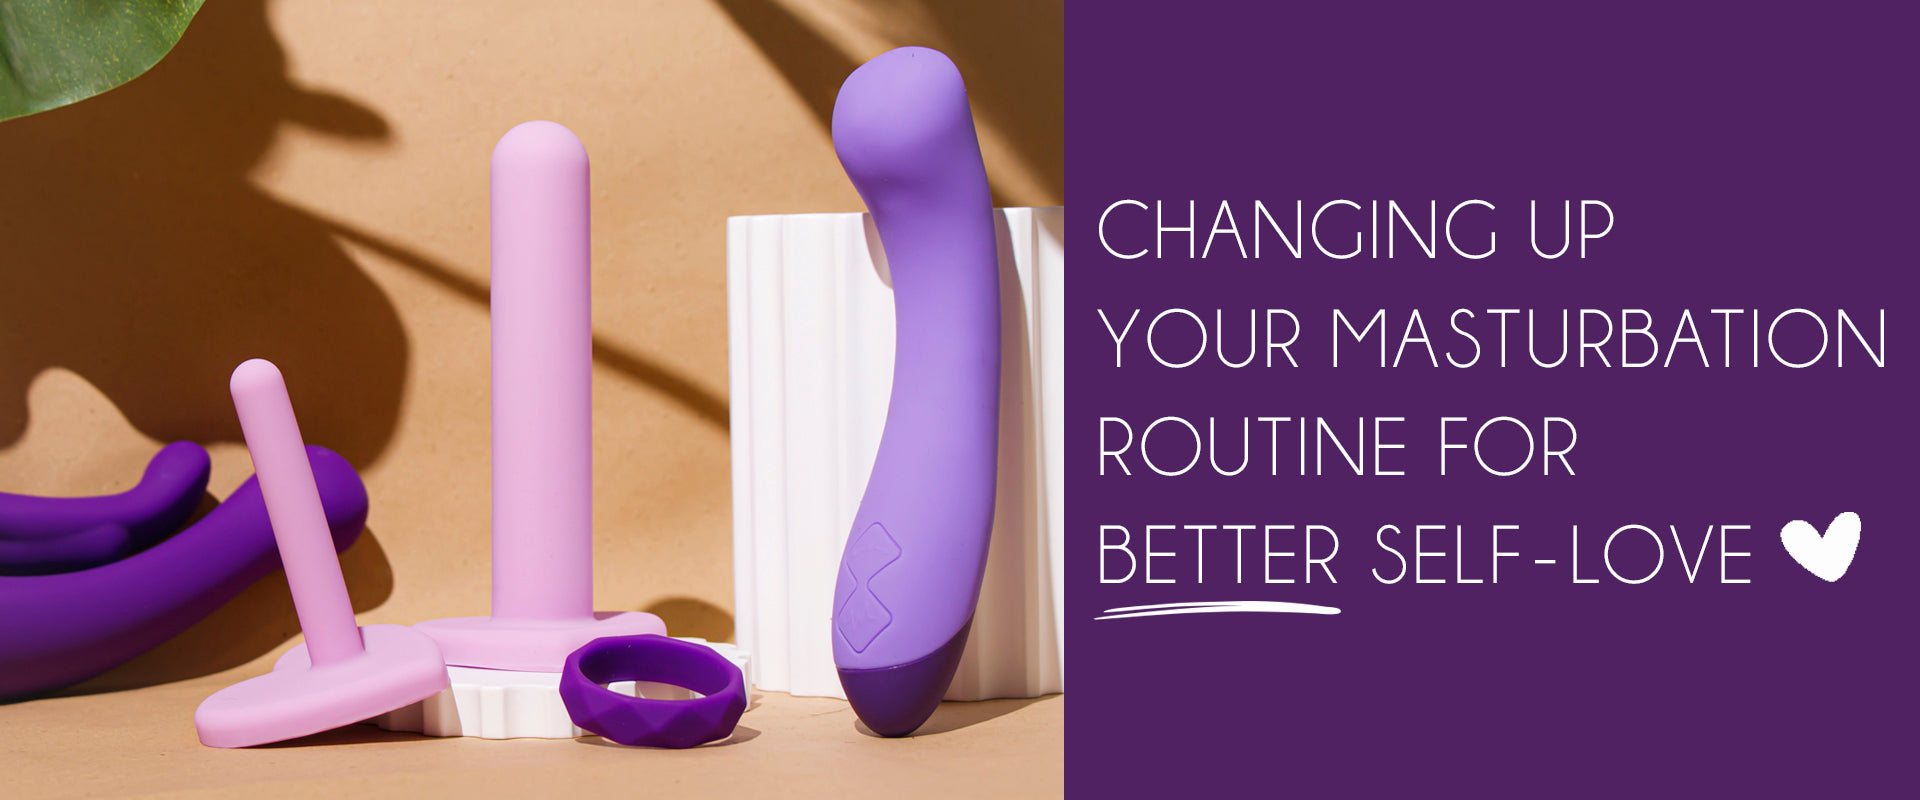 Changing Up Your Masturbation Routine for Better Self-Love